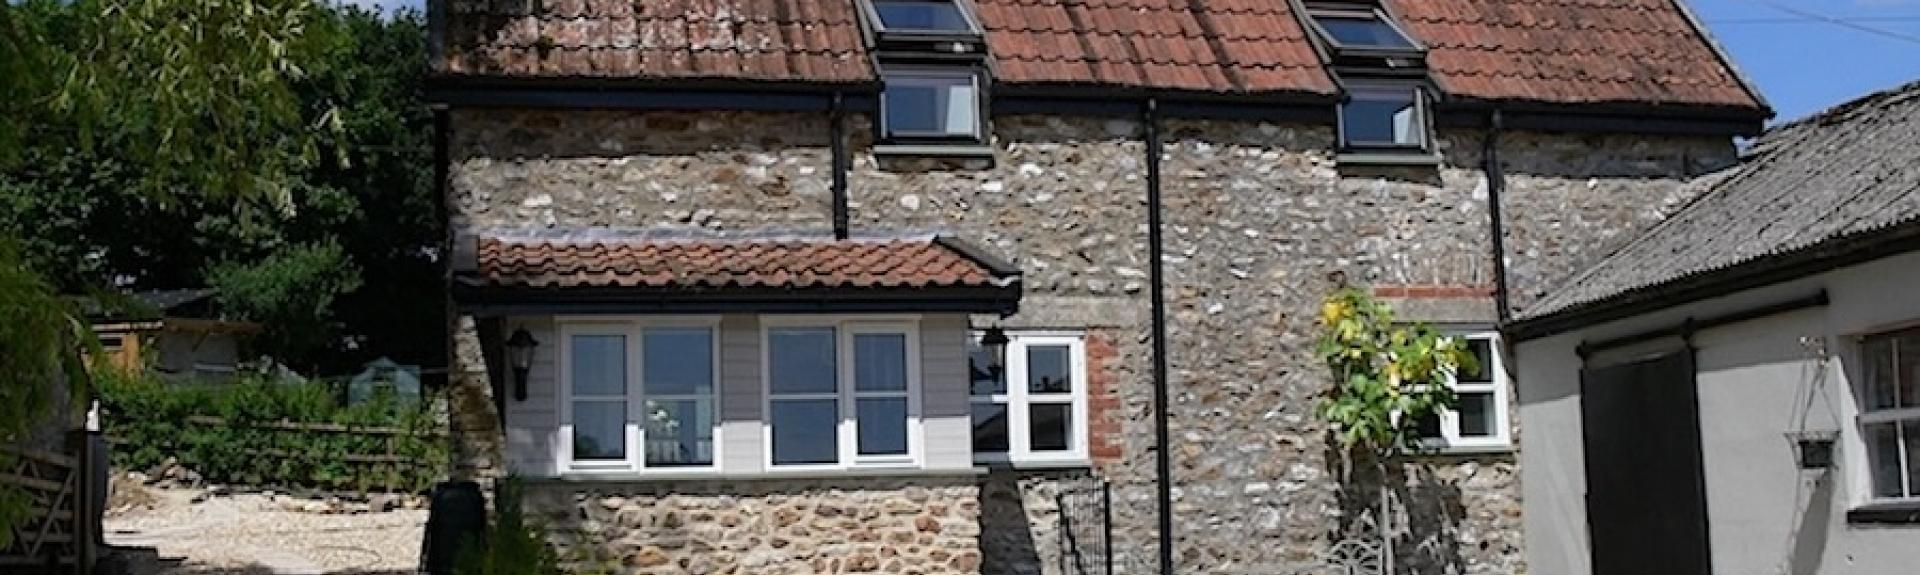 A 2-storey, stone-built East Devon holiday cottage overlooks a shingle covered courtyard.